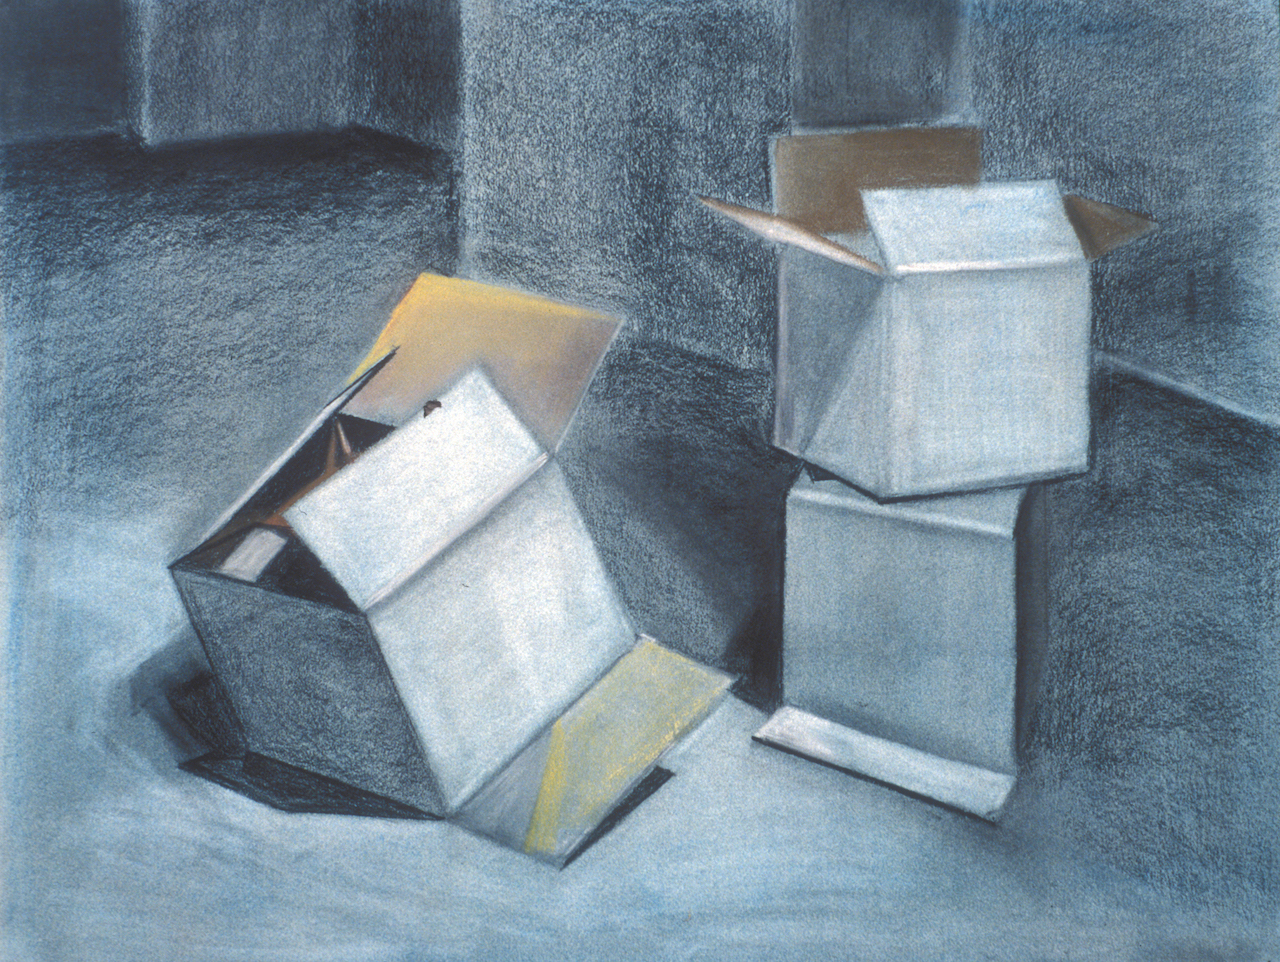 Still life with boxes